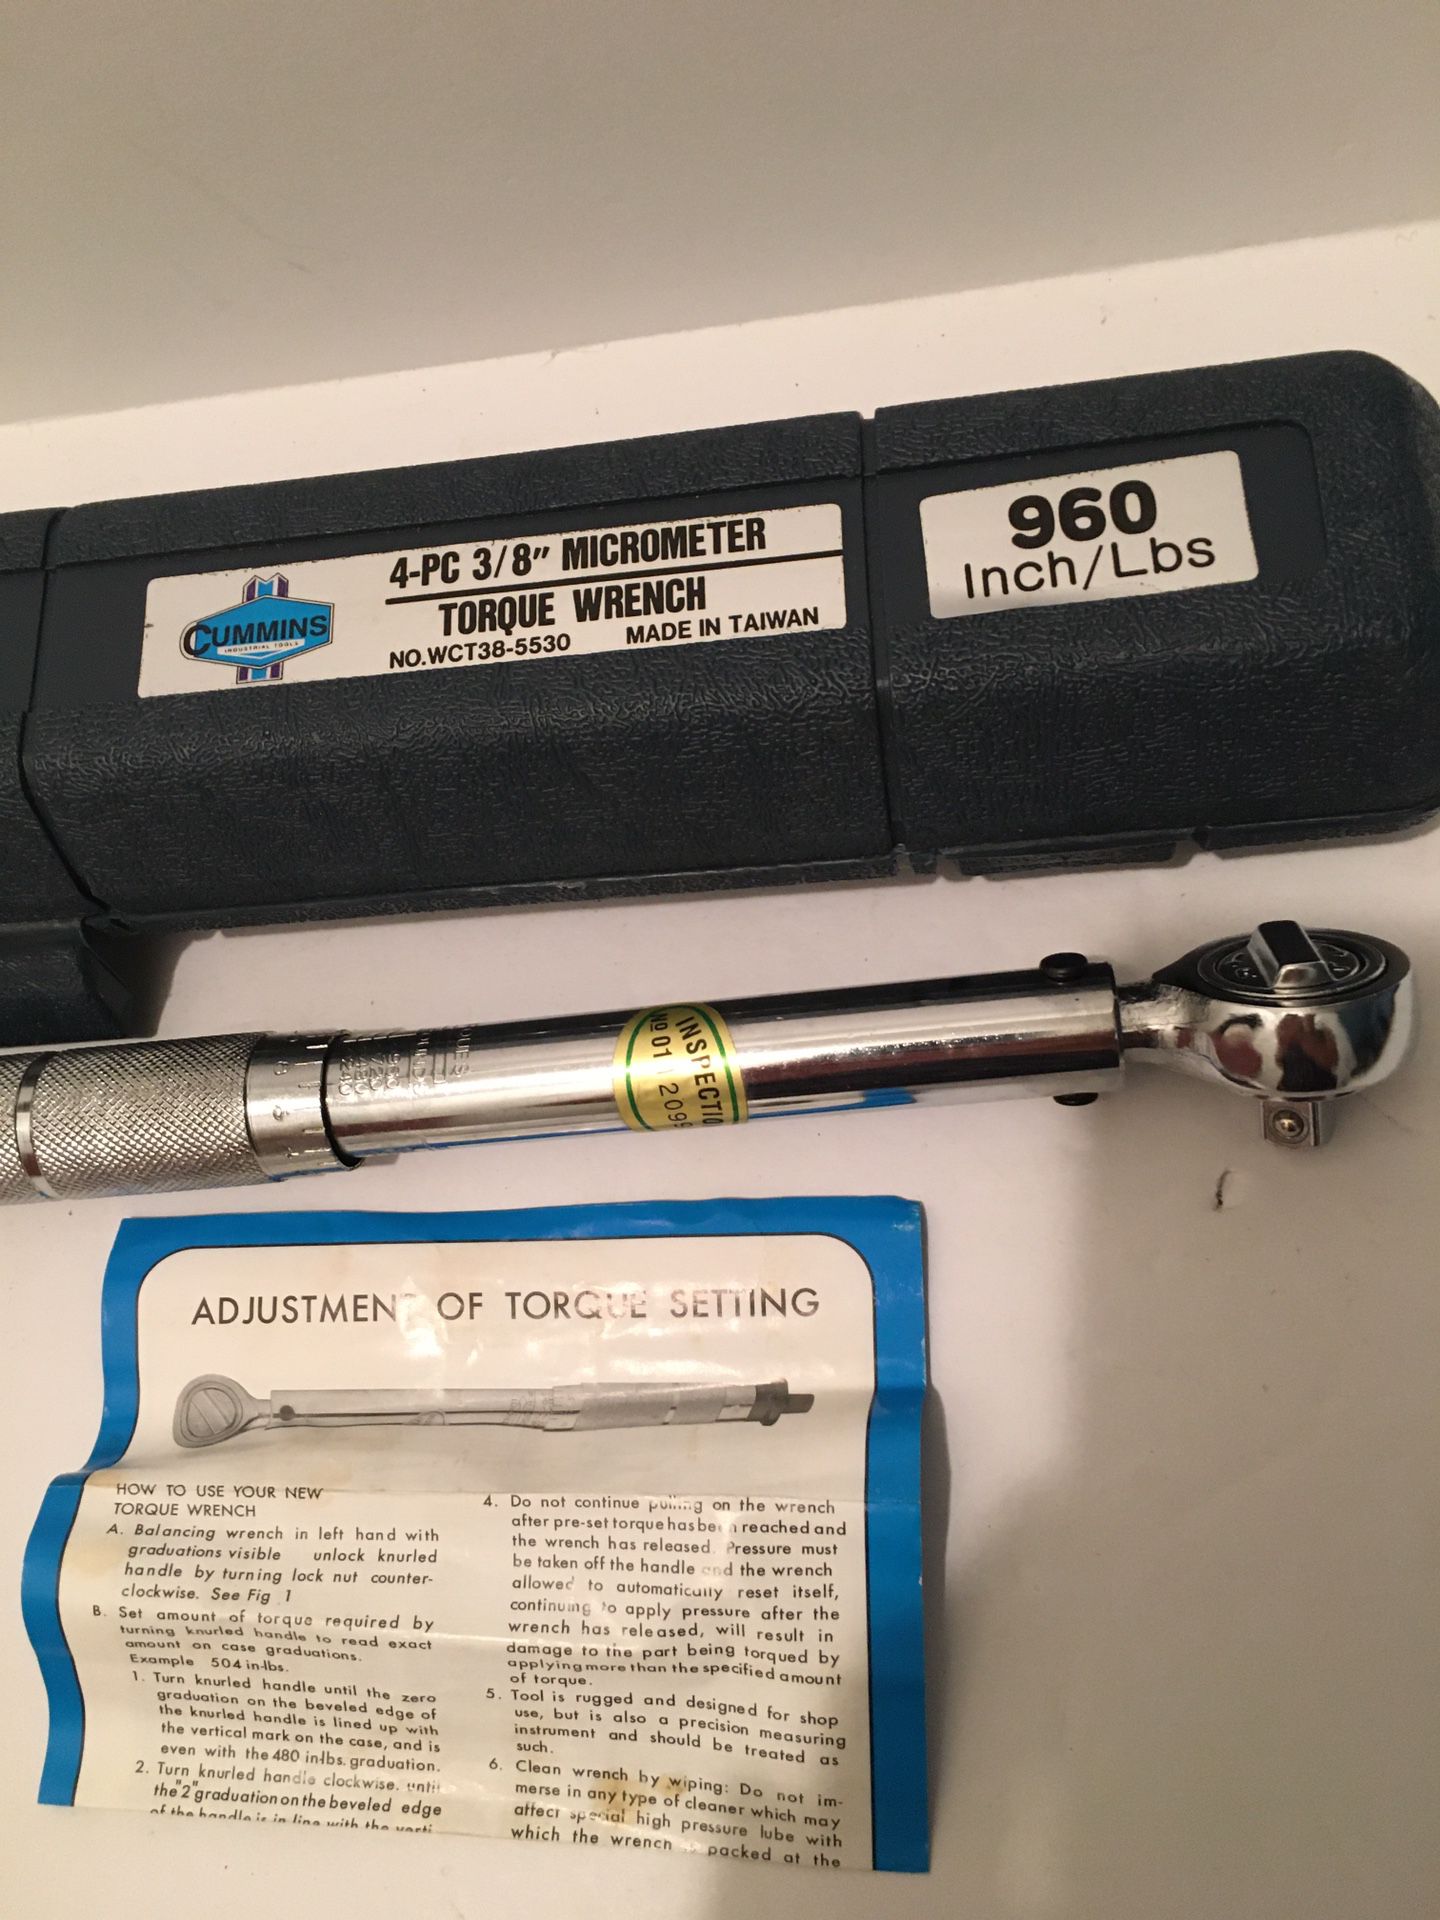 $20 Torque wrench 3/8 micrometer 960 inch pounds by Cummins instructions